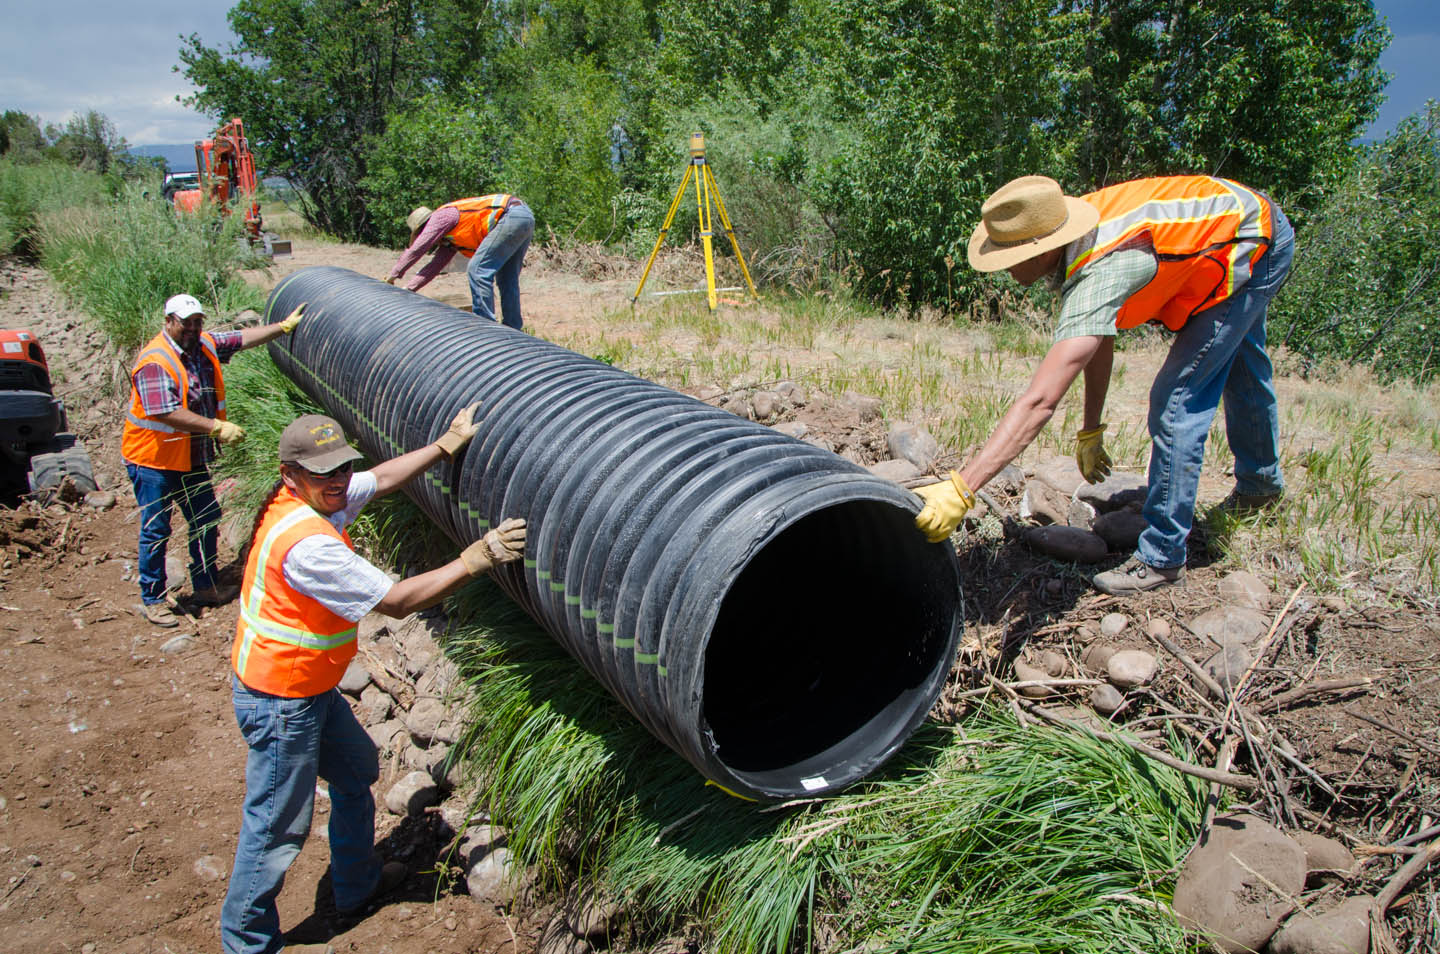 Crew members from the Southern Ute Indian Tribe’s Department of Natural Resources work together with the U.S. Bureau of Indian Affairs to set plastic ADS culvert on Tuesday, July 9, to stabilize the damaged canal in an effort to restore water flow by the end of the week.